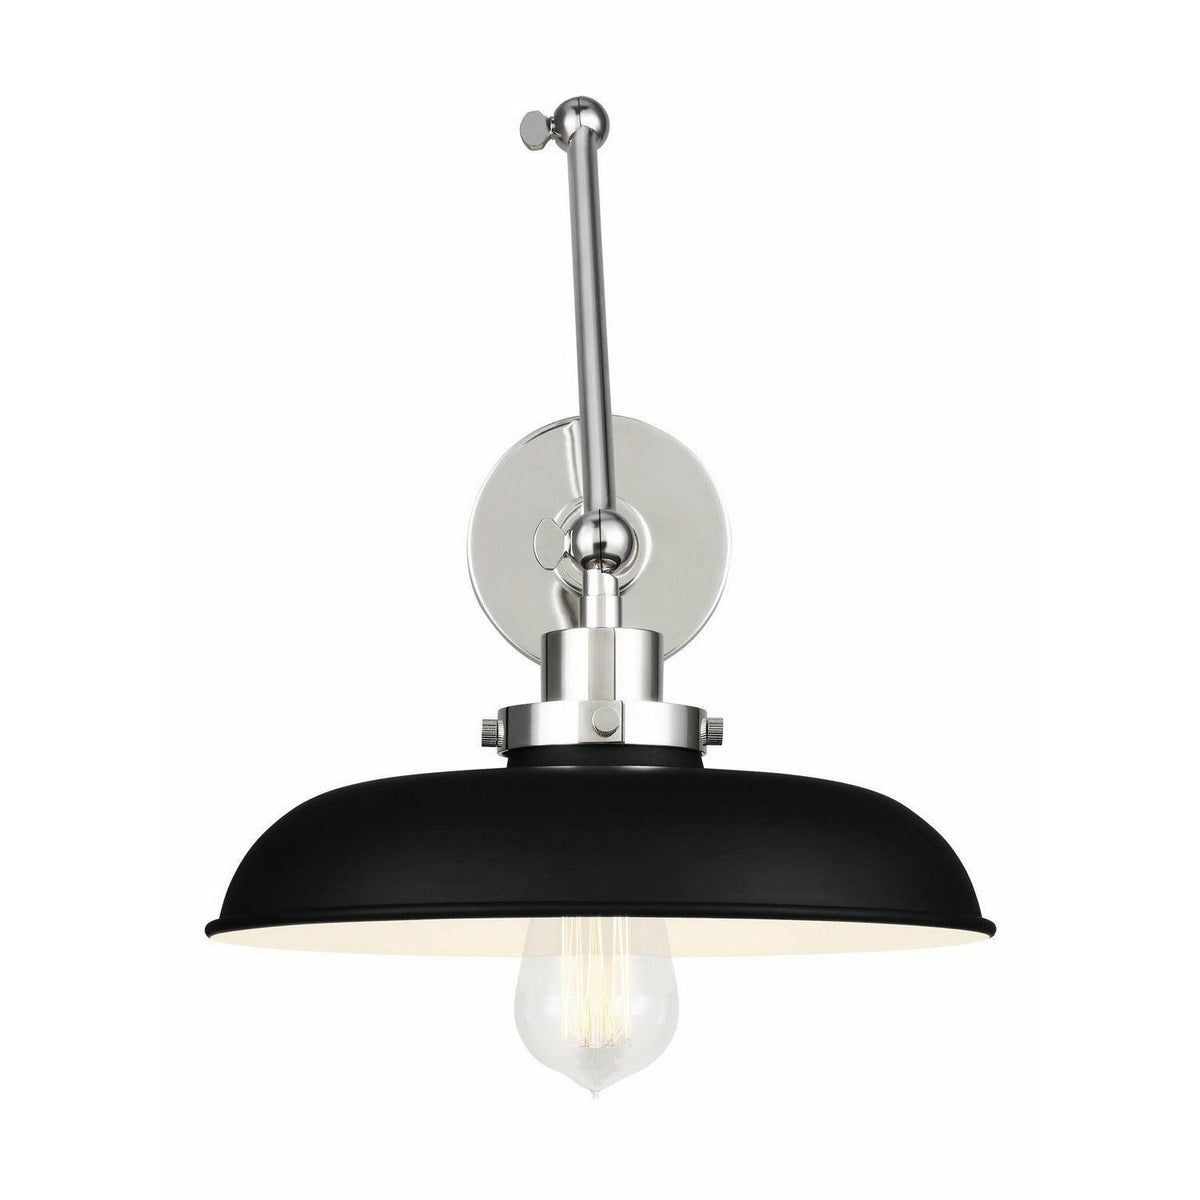 Visual Comfort Studio Collection - Wellfleet Double Arm Wide Wall Sconce - CW1171MBKPN | Montreal Lighting & Hardware